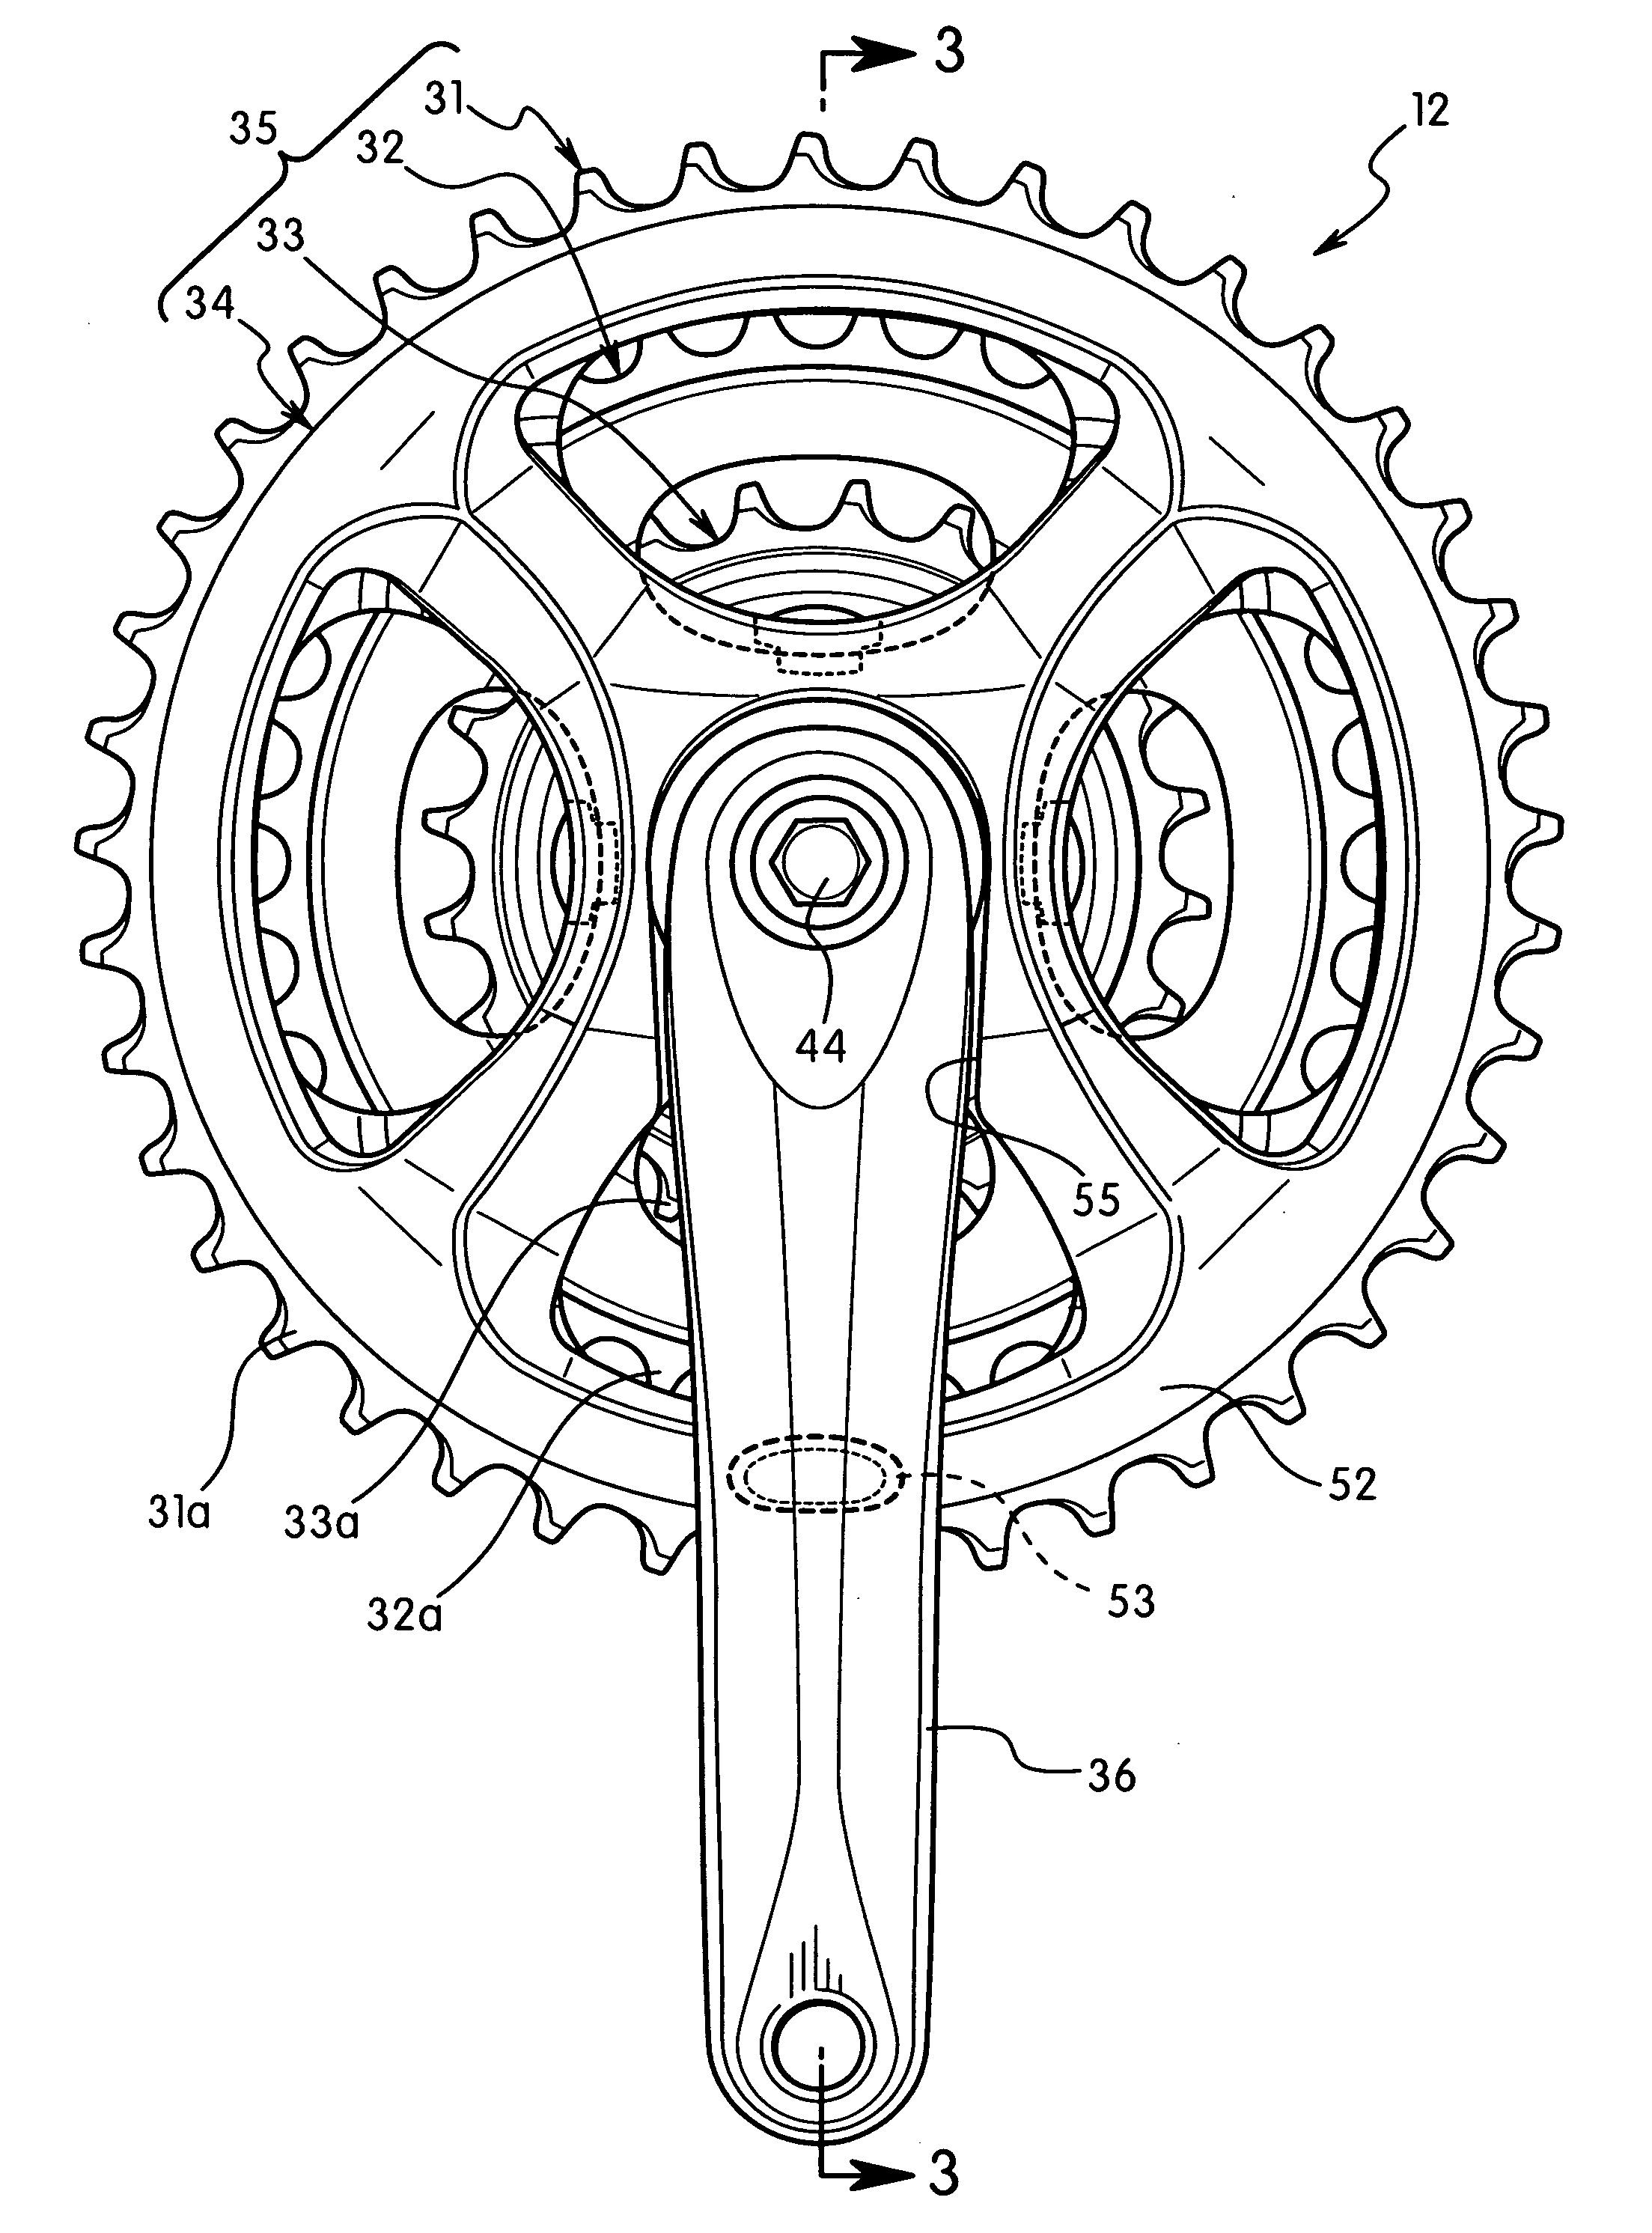 Bicycle chain wheel assembly